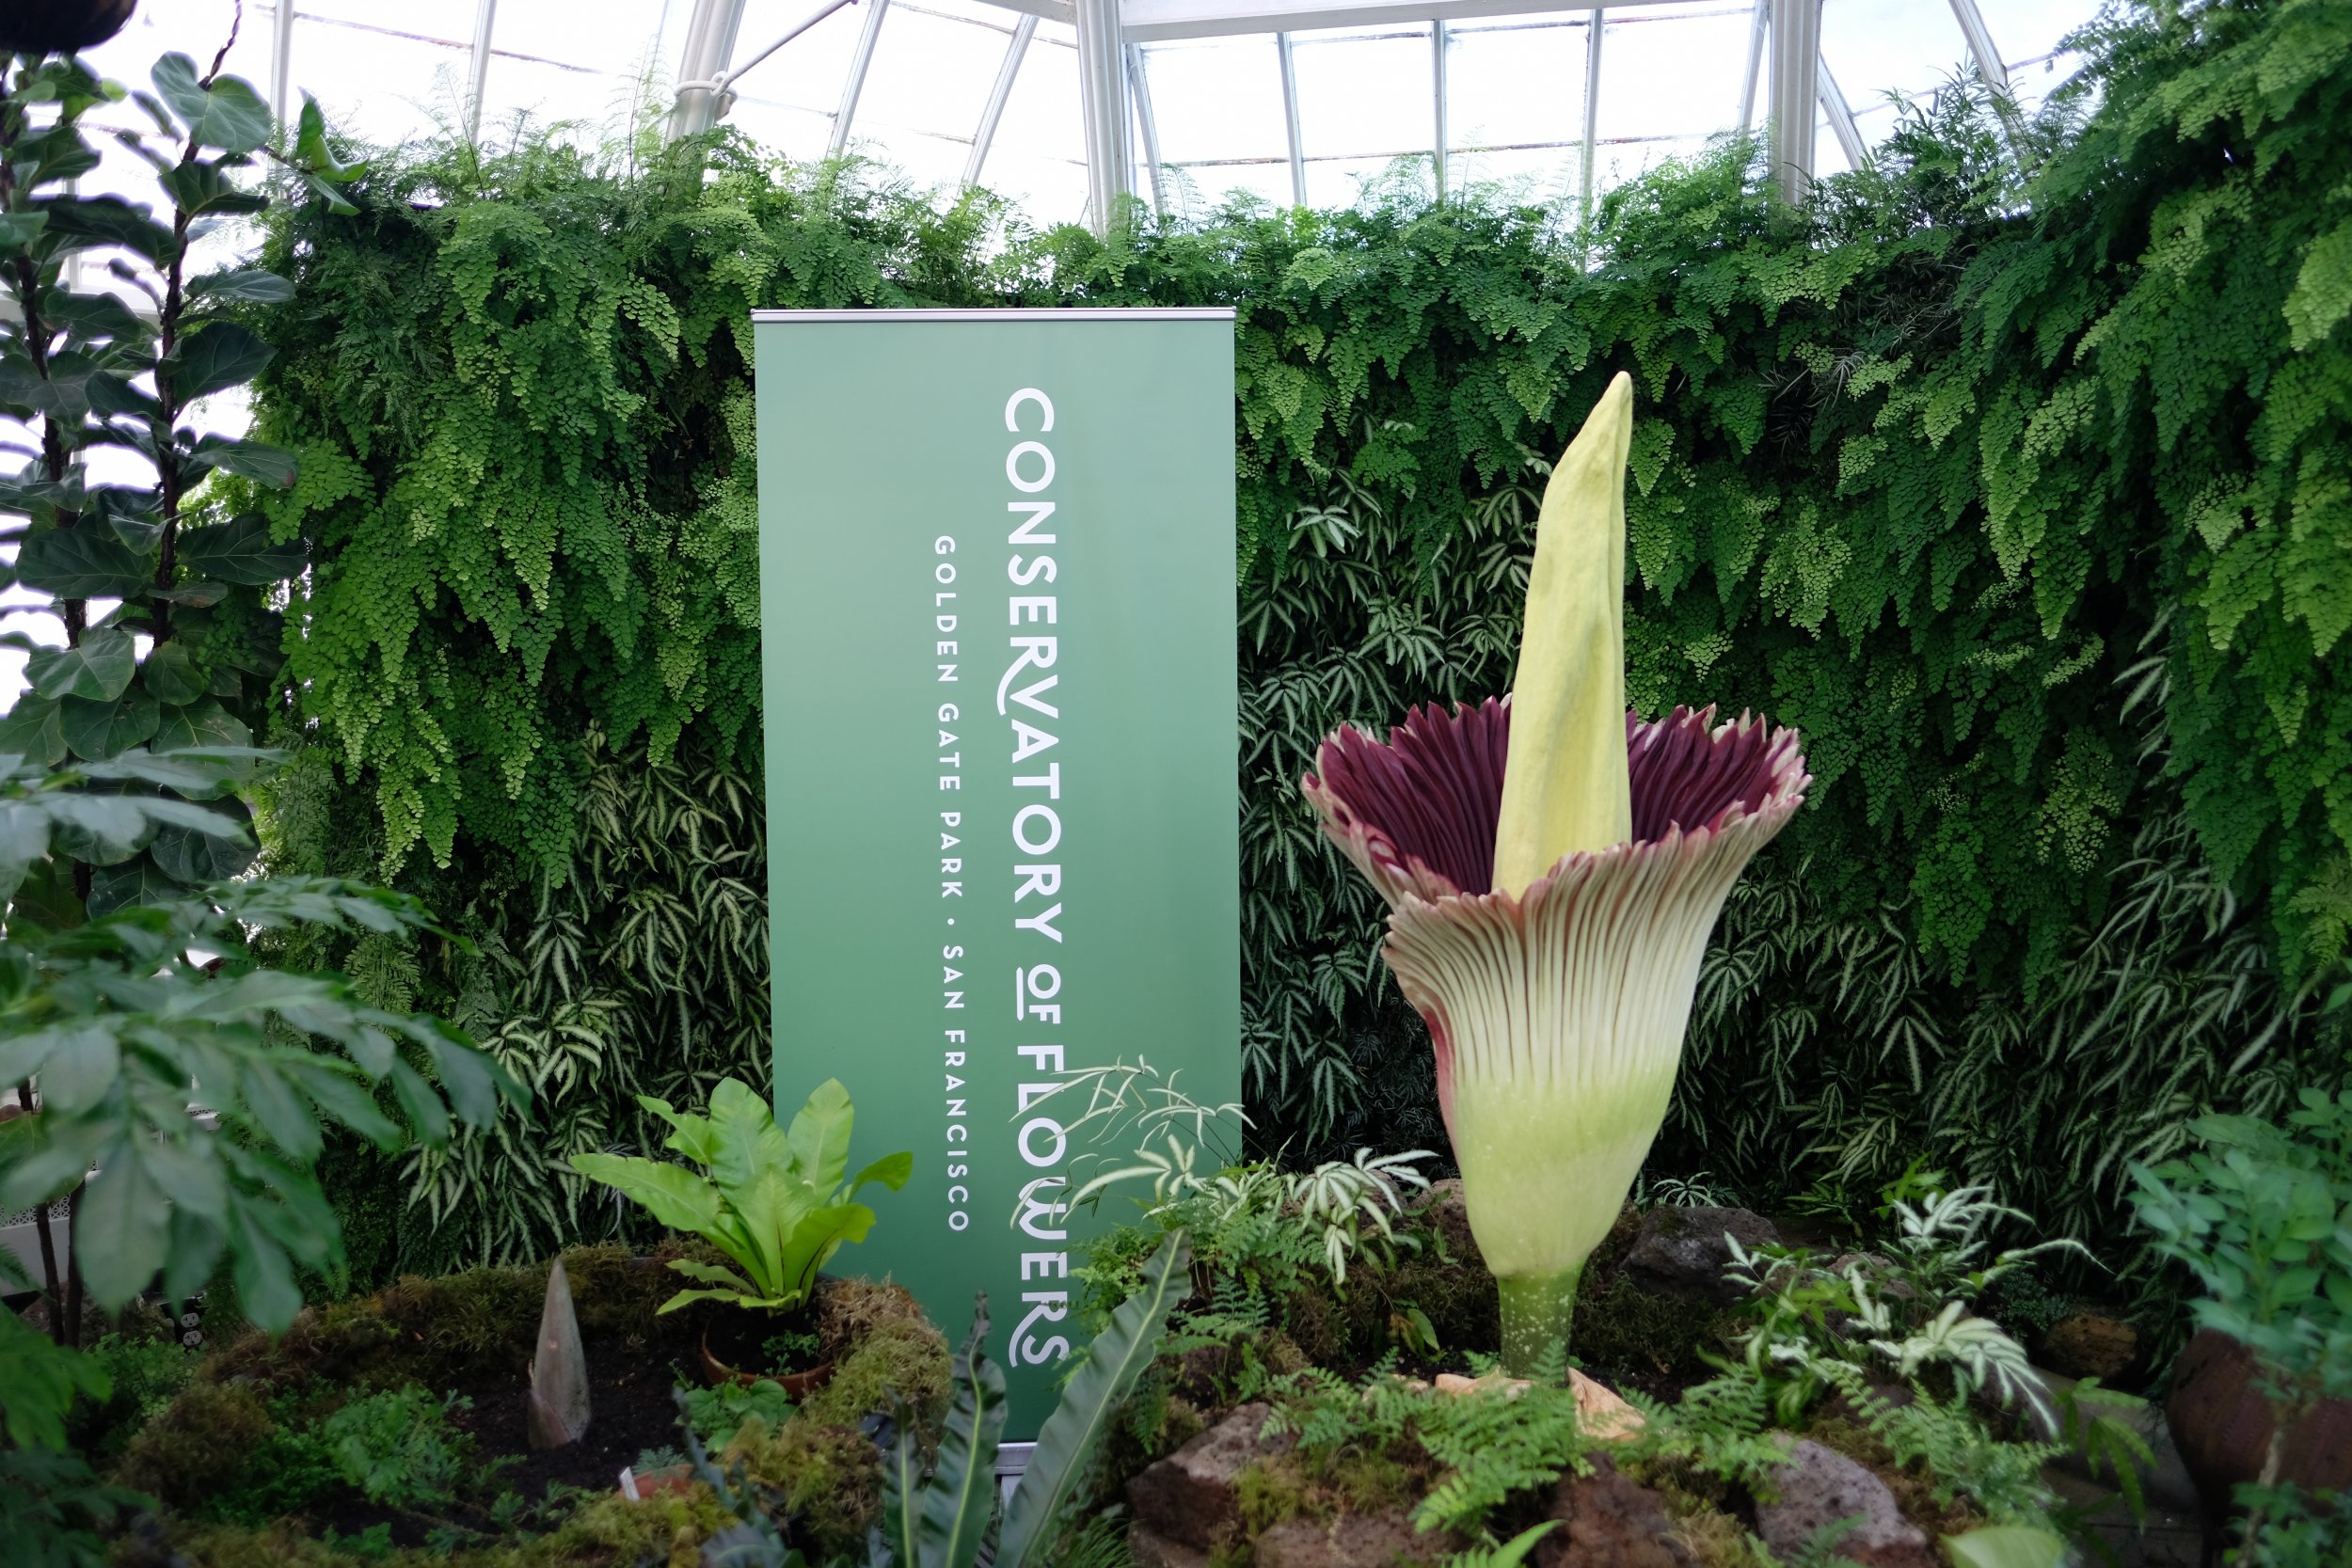 corpse flower: visitors line up to sniff rare once-in-a-decade bloom